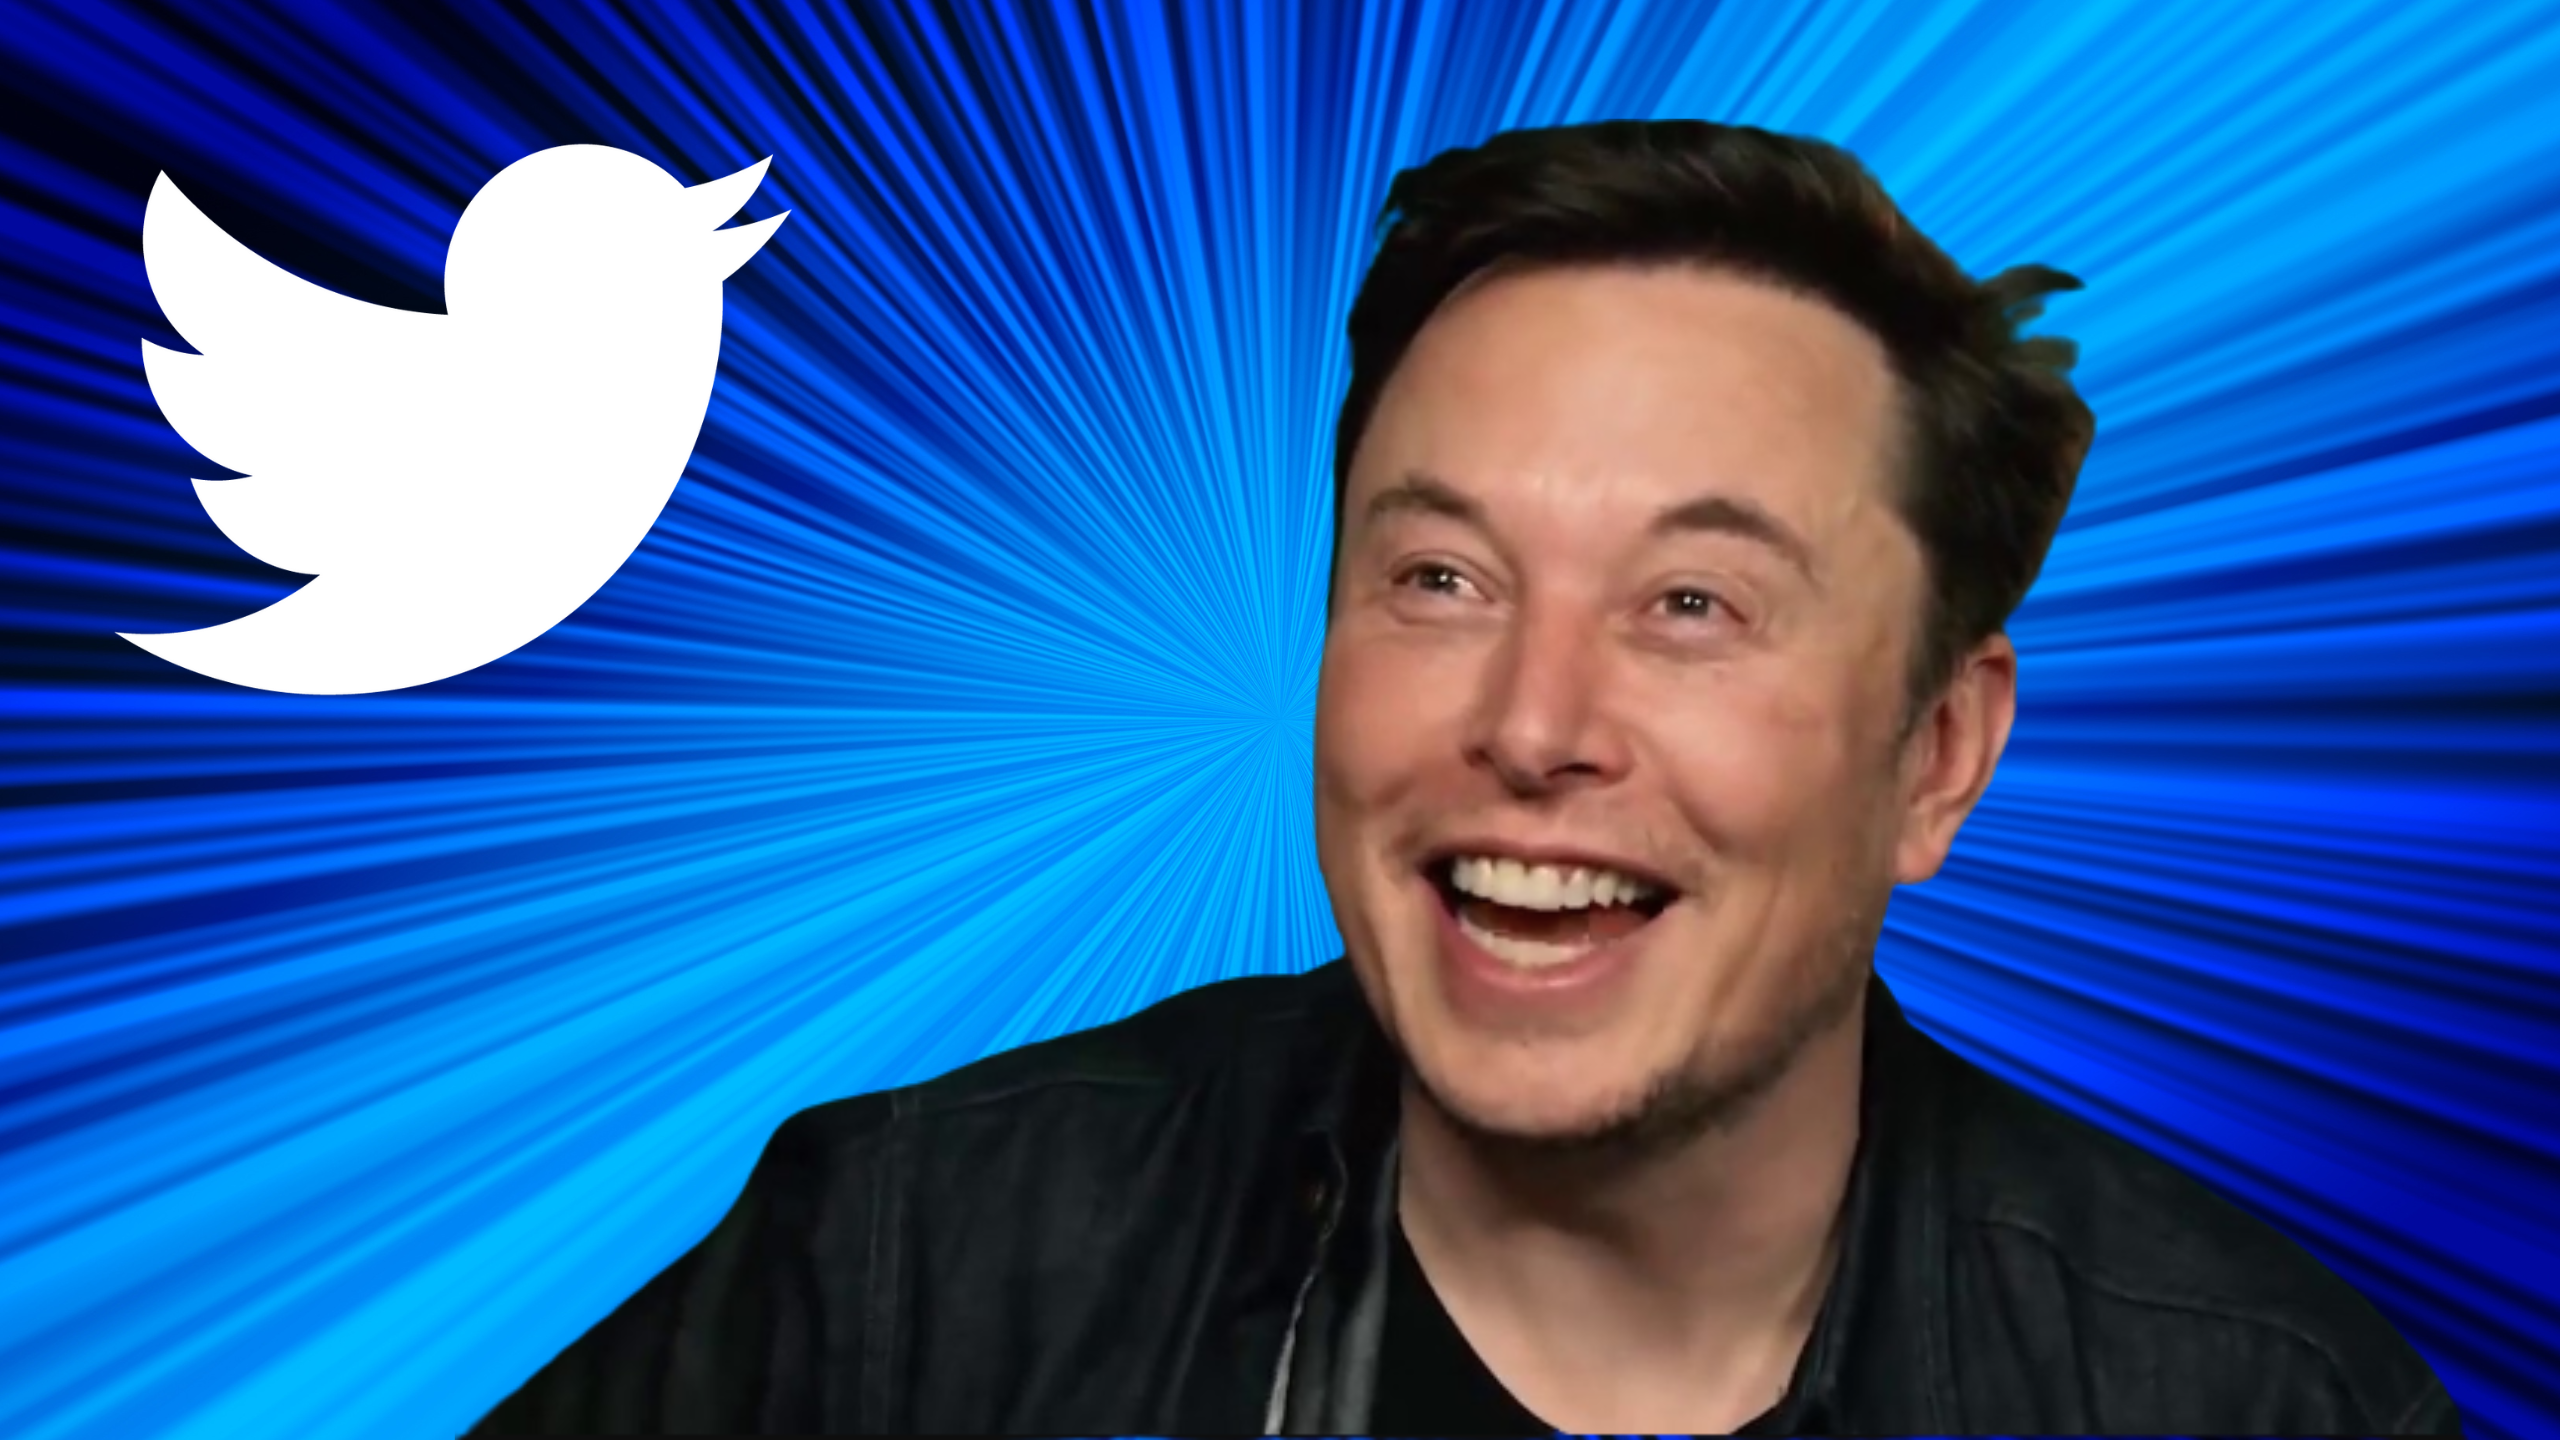 The end of the Elon Musk-Twitter deal is nigh. What’s in store for Twitter’s future?